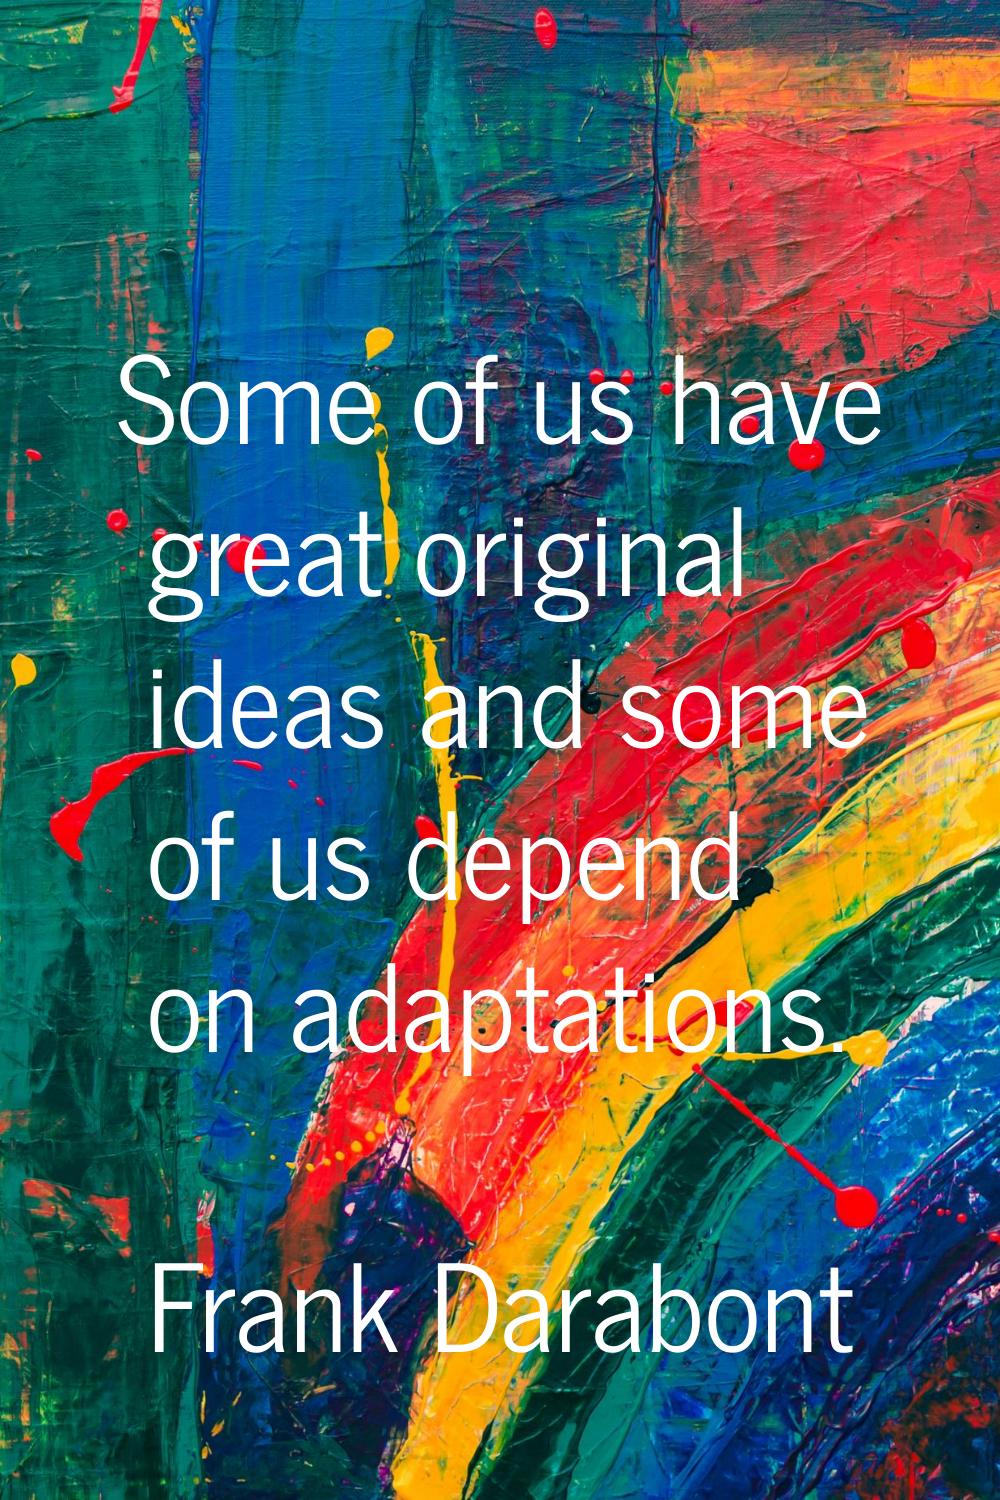 Some of us have great original ideas and some of us depend on adaptations.